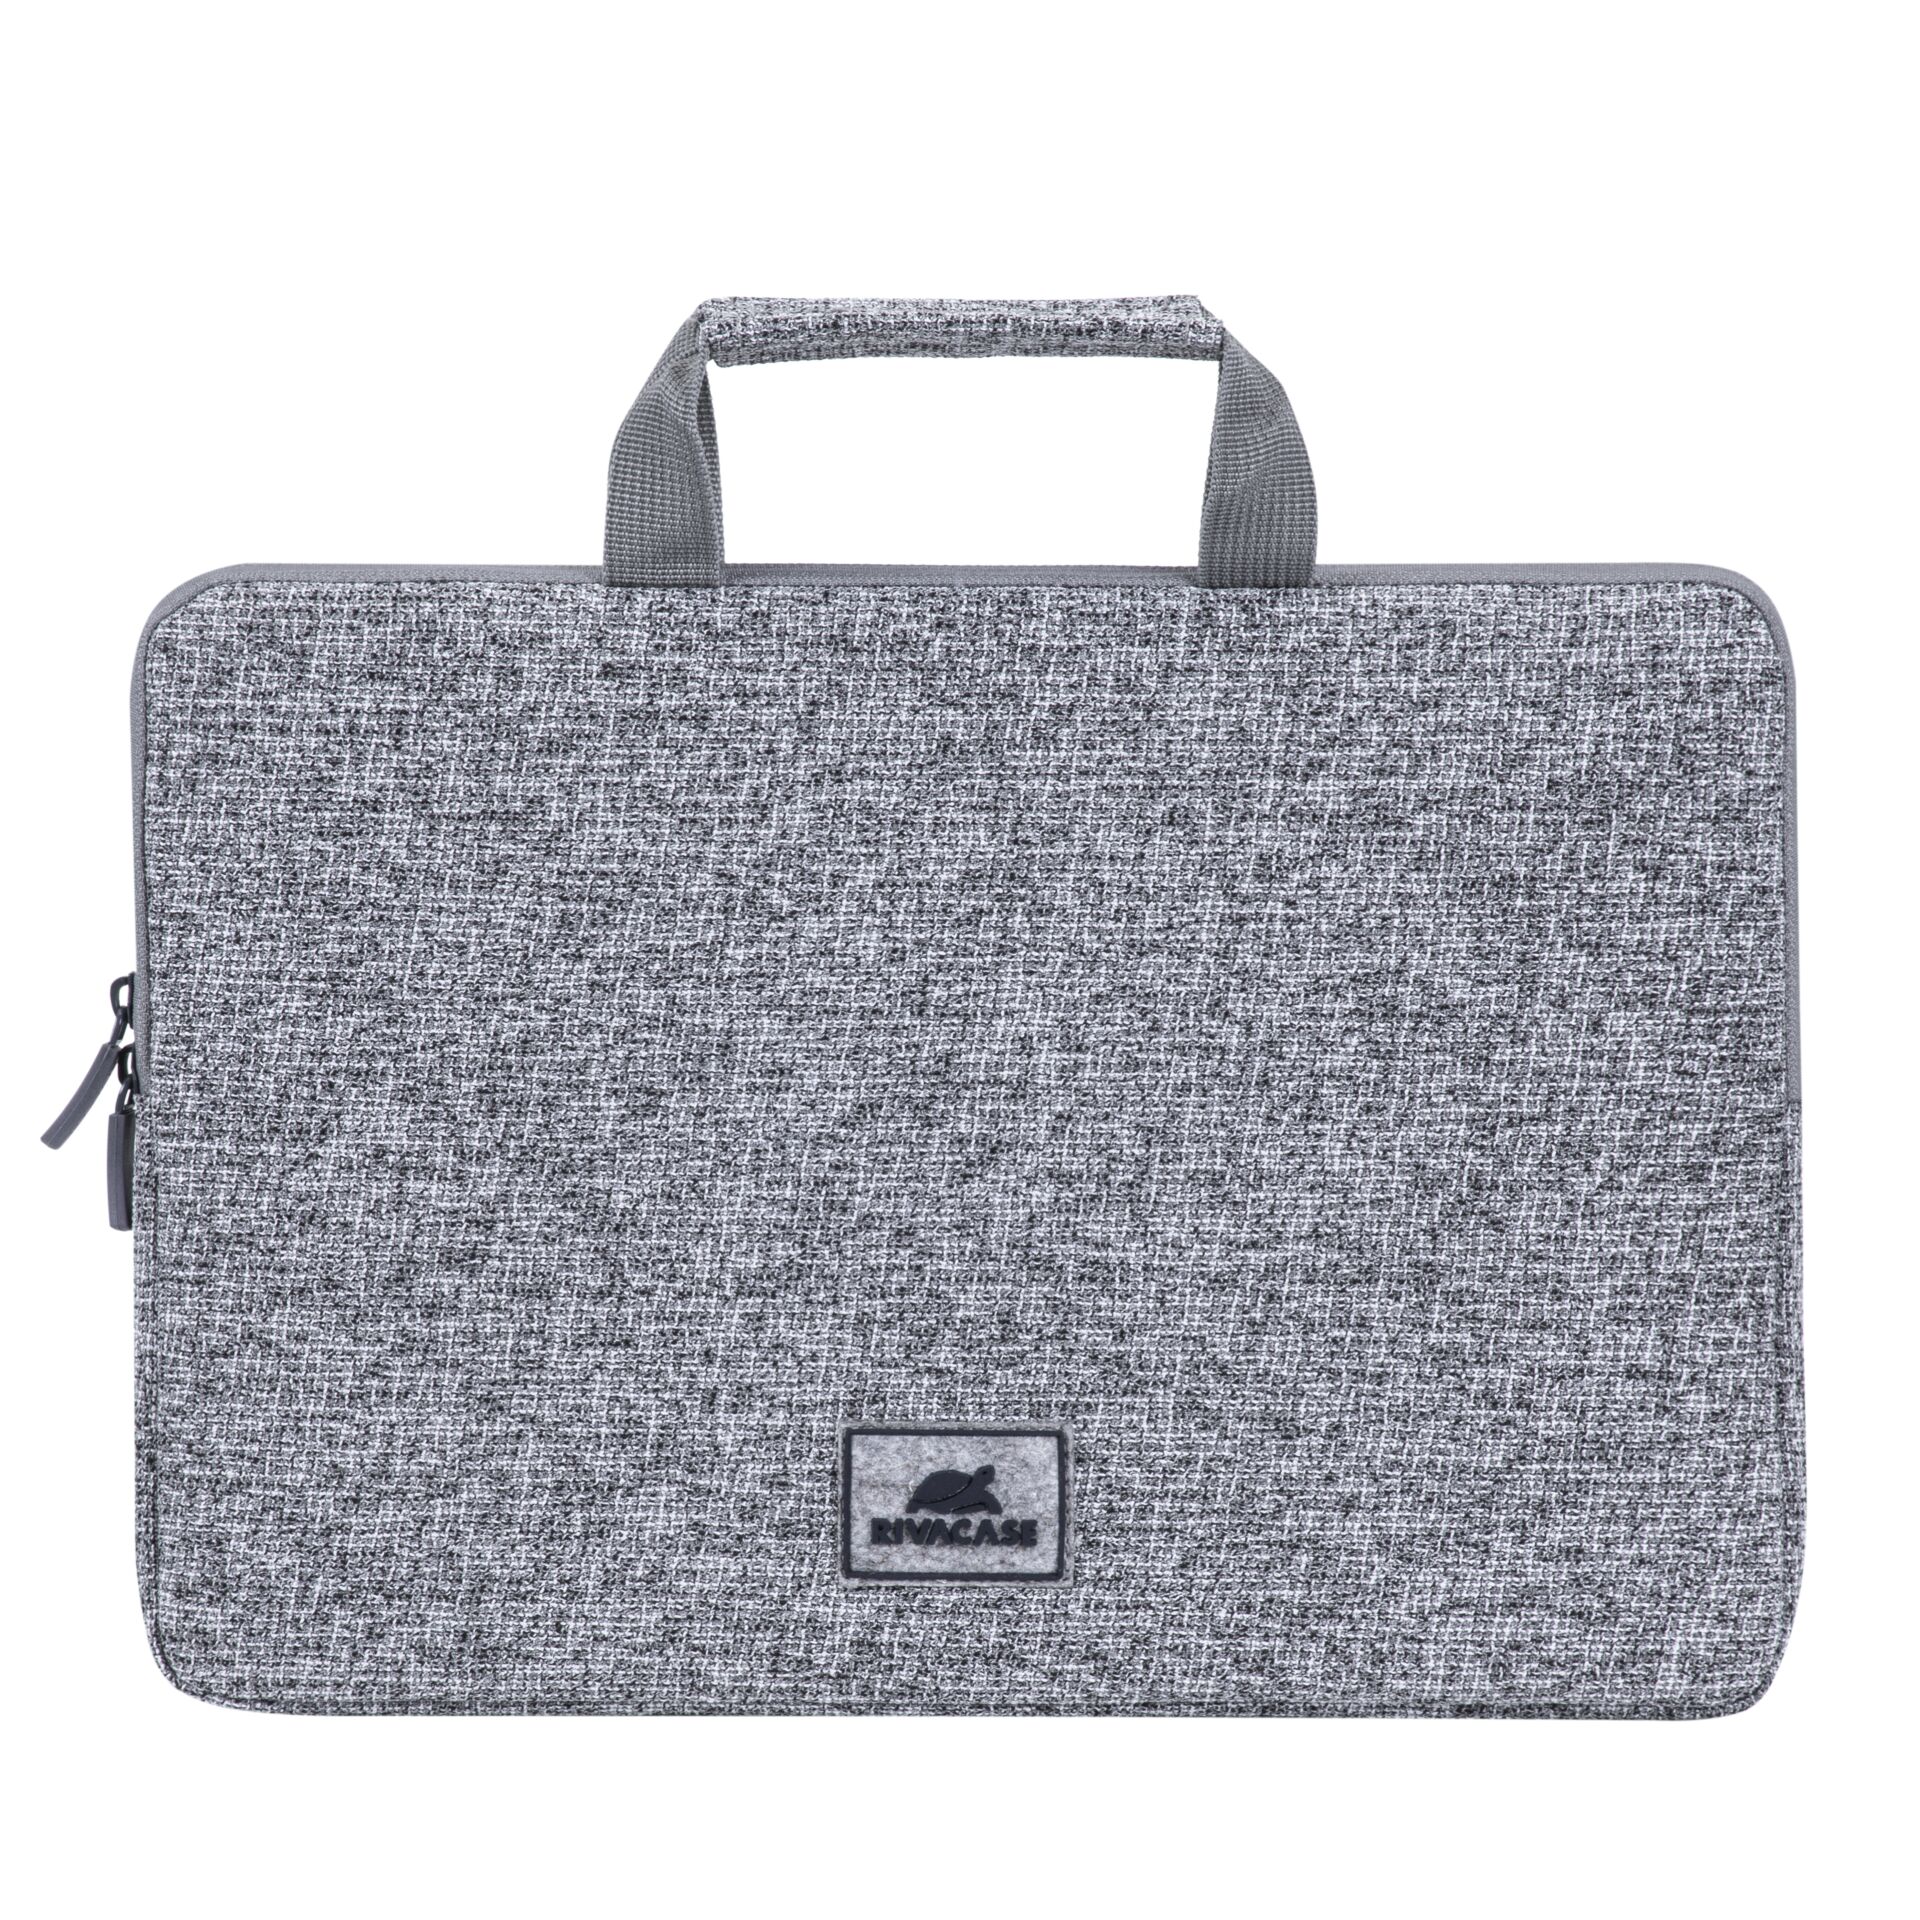 Rivacase 7913 Laptop Sleeve 13.3  with Handles light grey